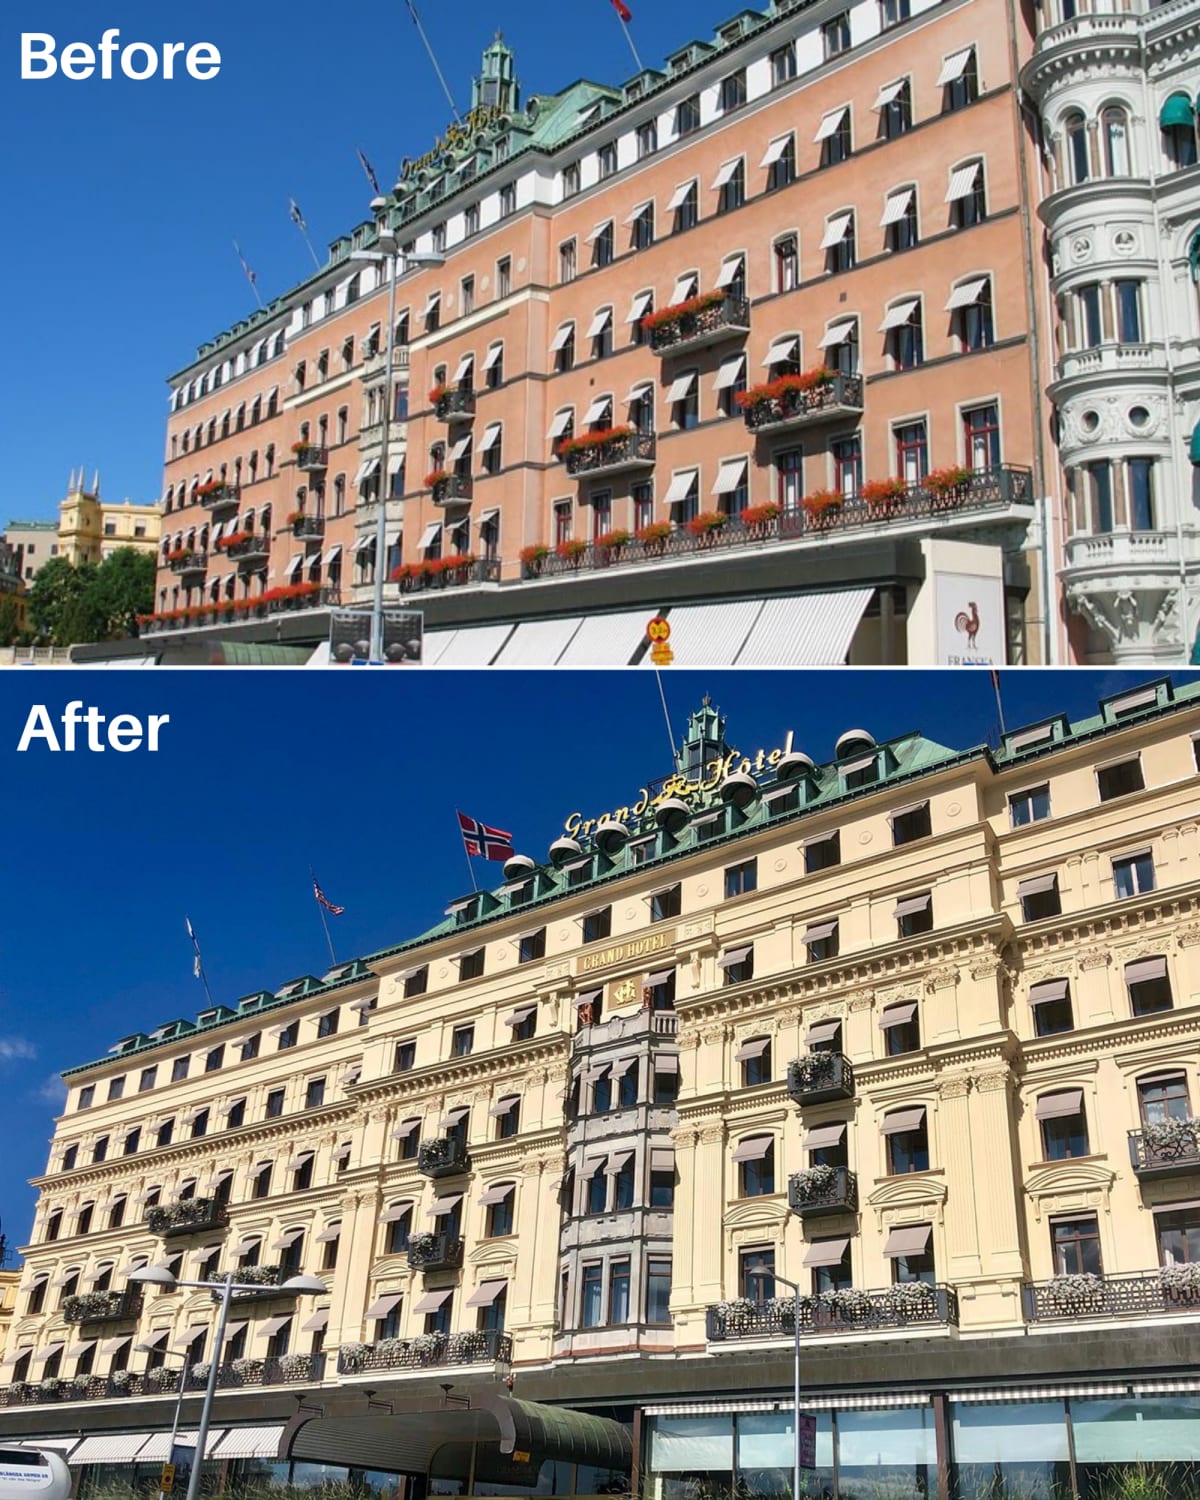 Grand Hôtel in Stockholm got a real refurbishment in 2018, and for that we're thankful!